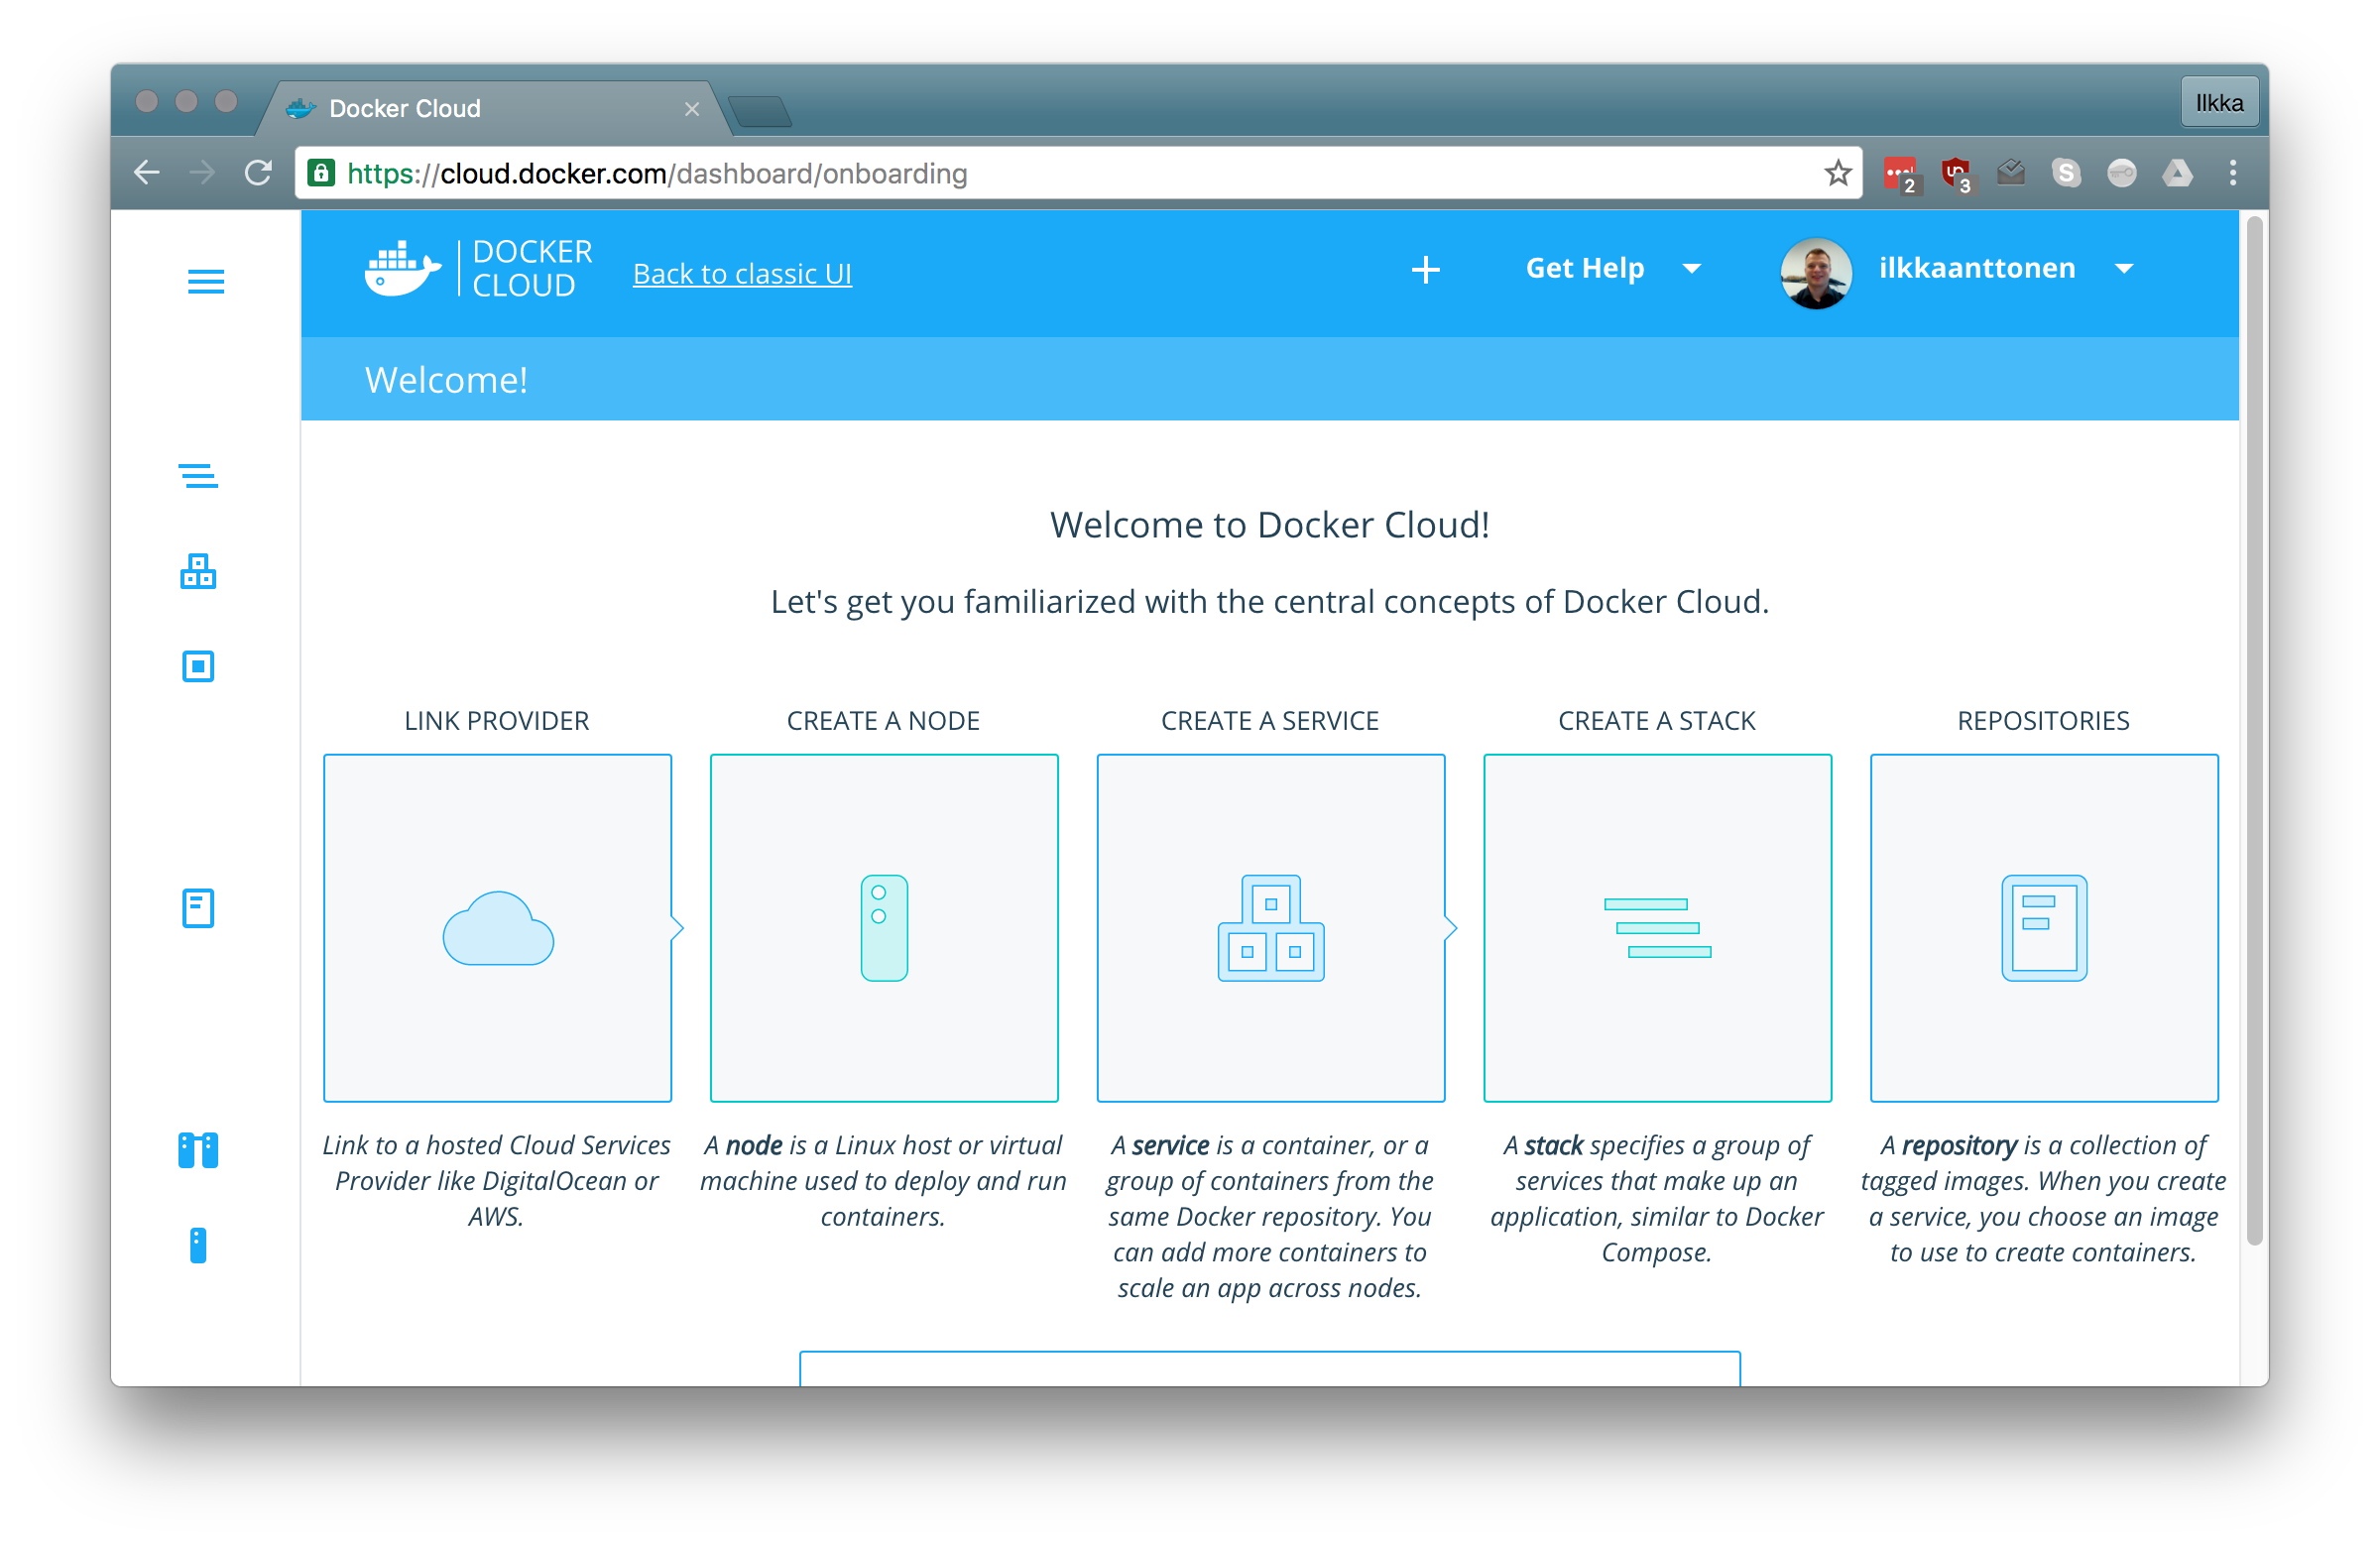 Getting started with Docker Cloud